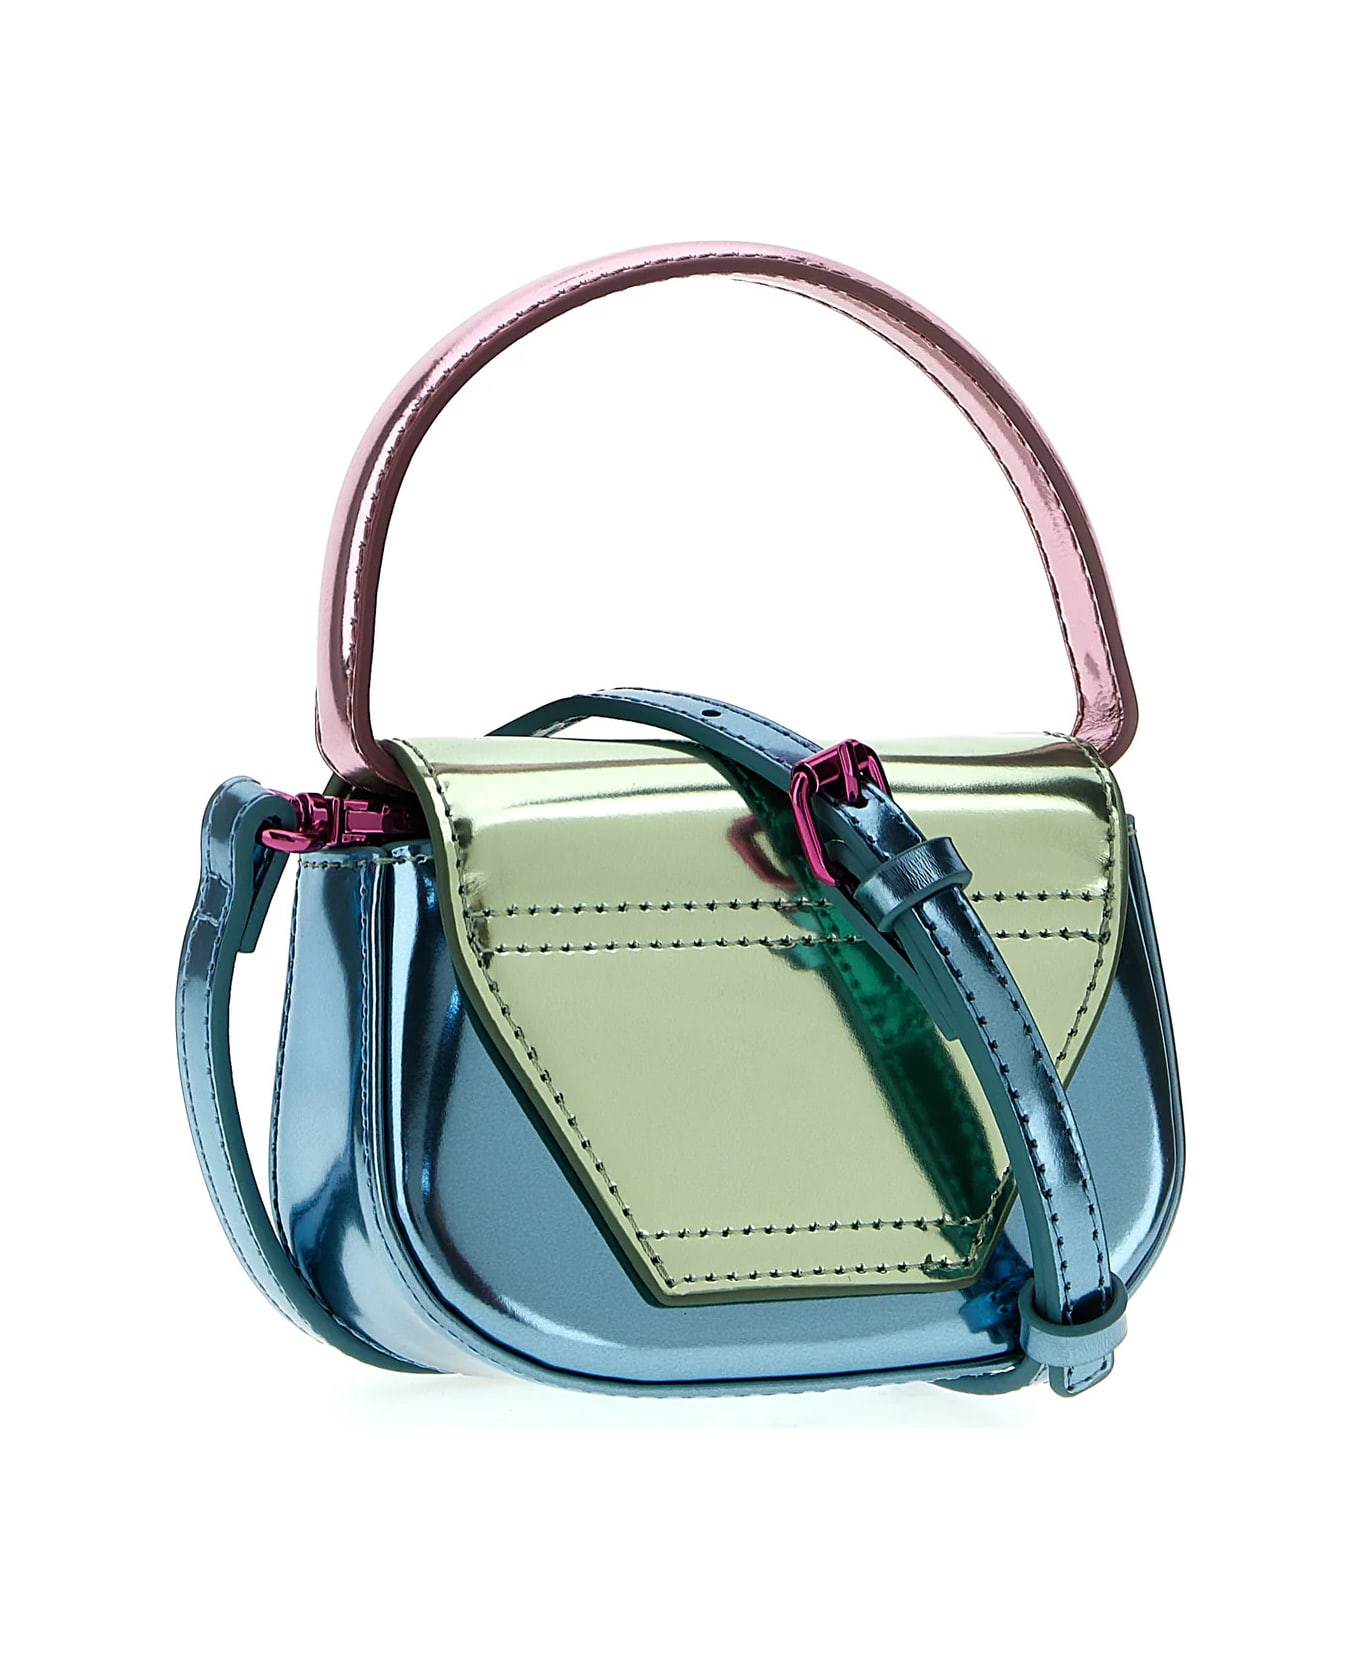 Diesel 1dr Xs Bag In Green And Blue Metallic Leather - Green